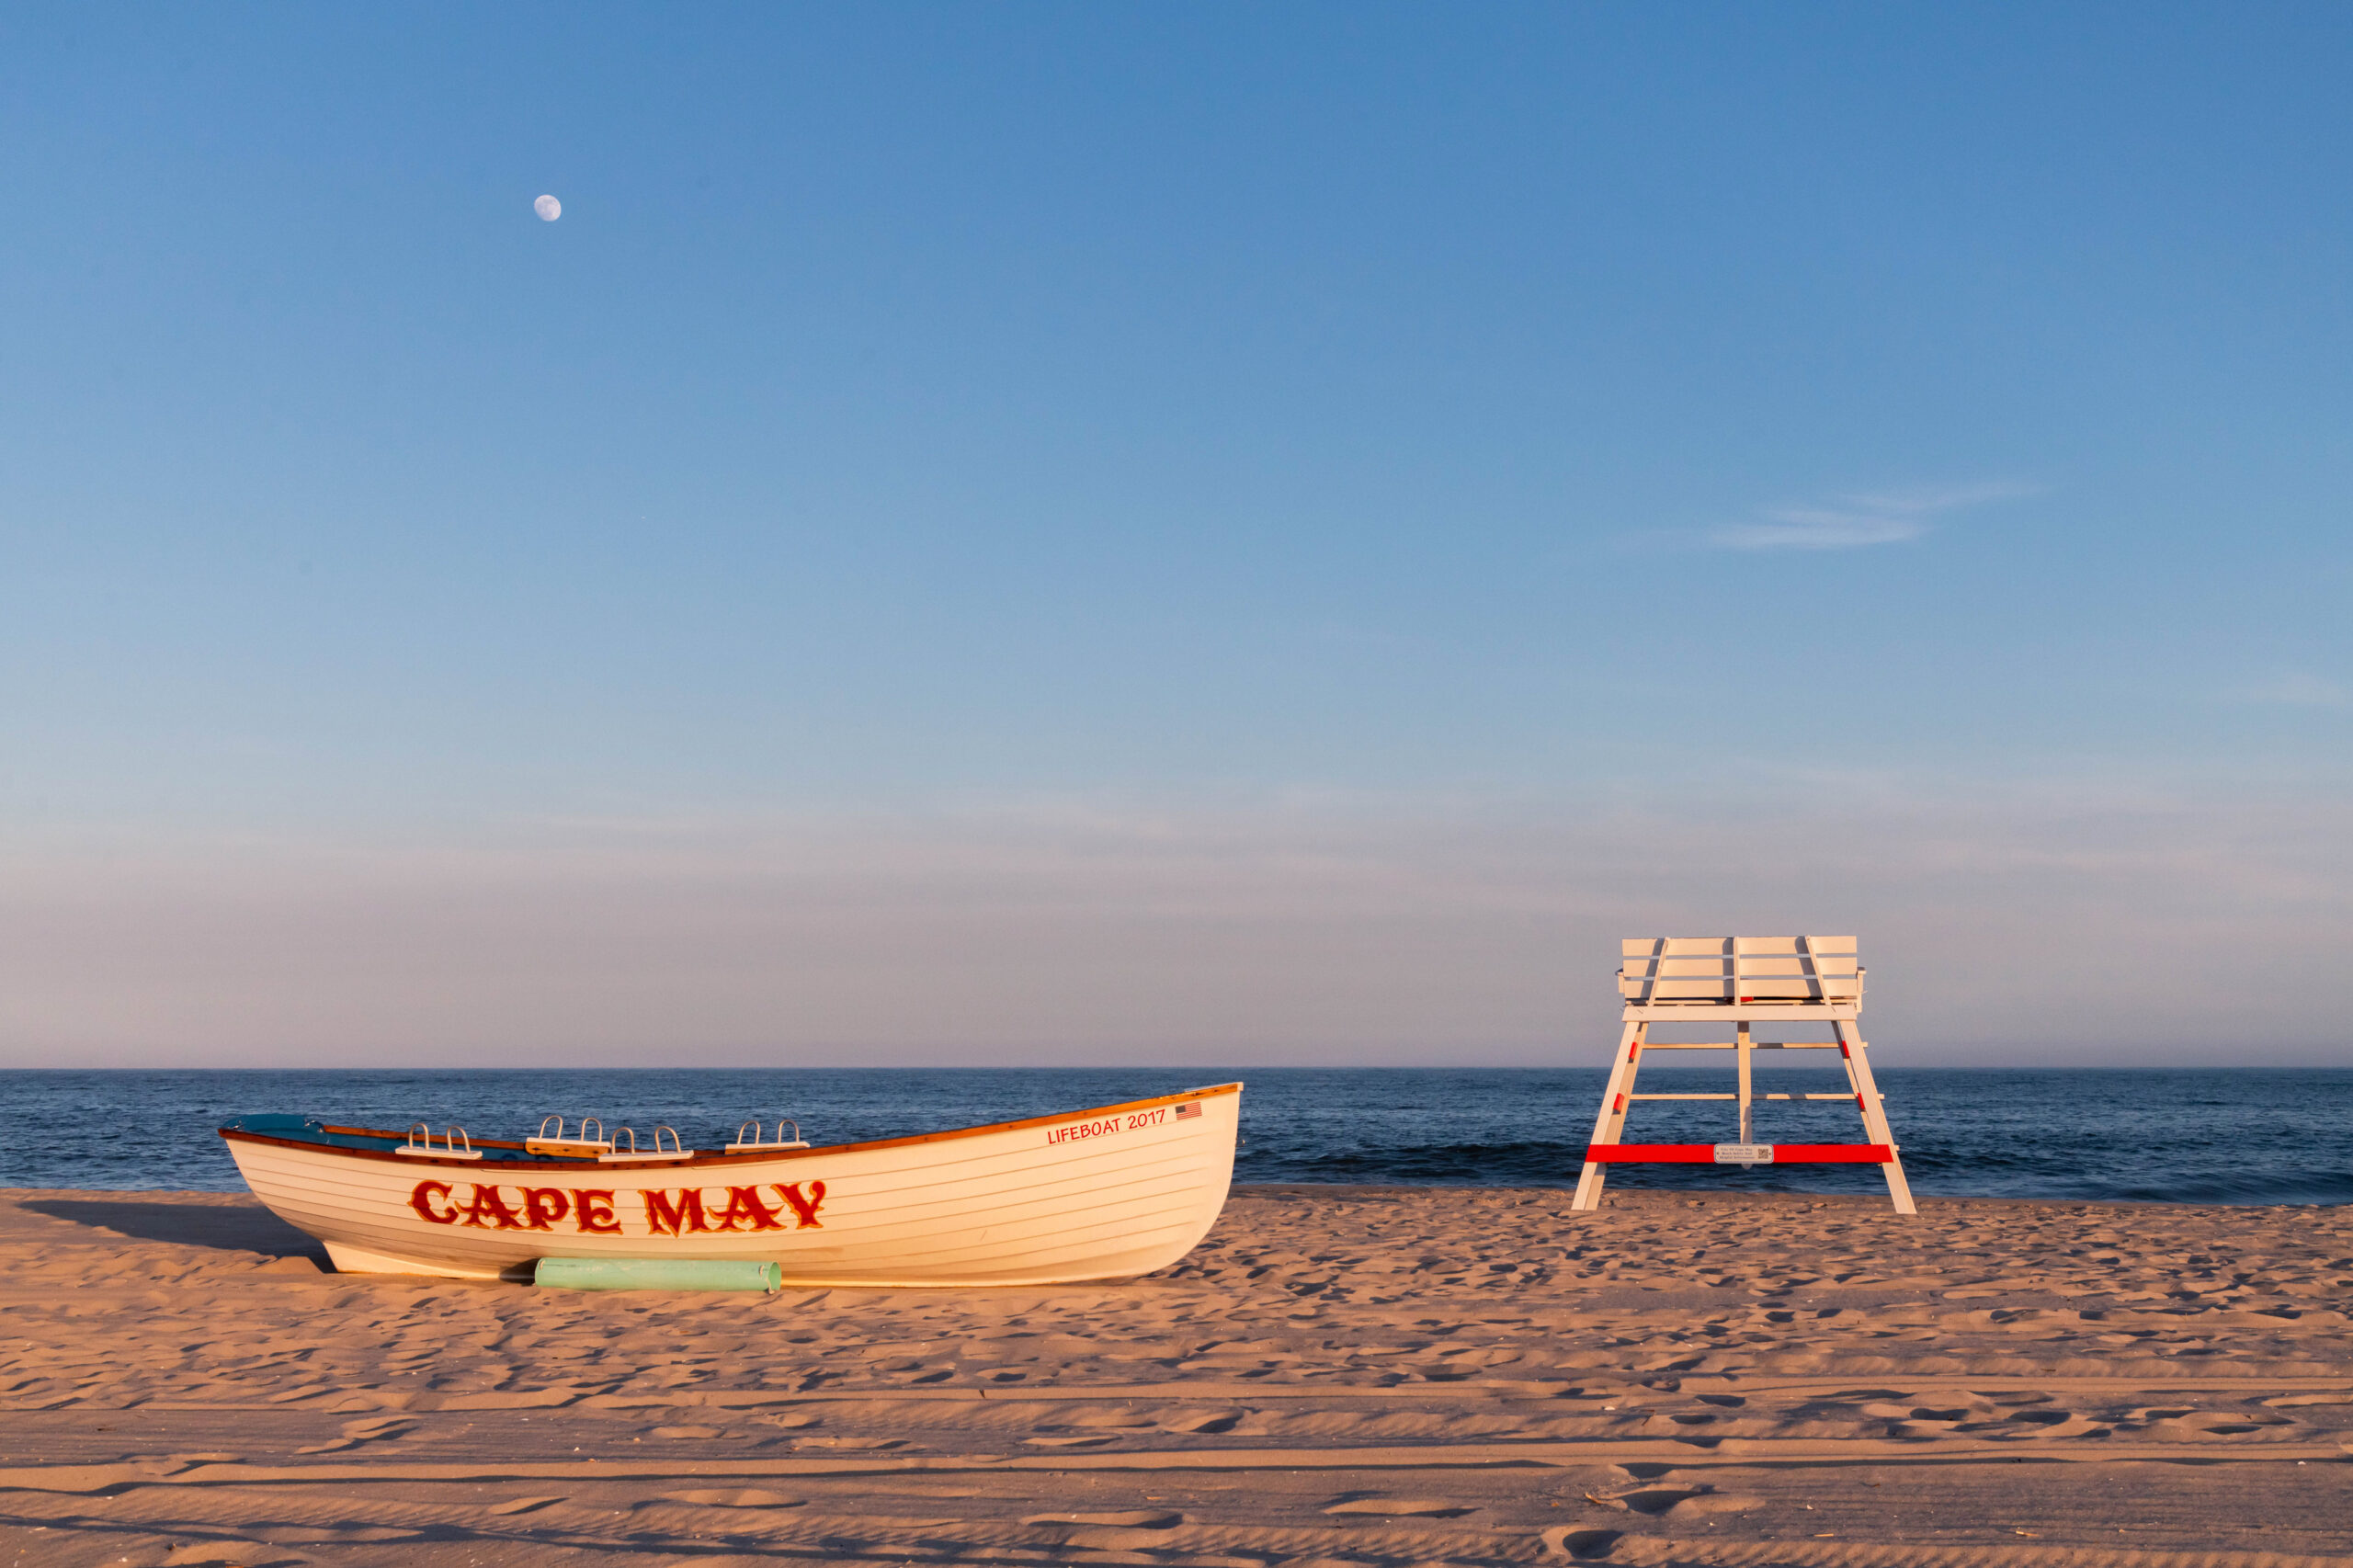 A Cape May lifeguard boat and lifeguard stand on the beach at sunset with a full moon in the clear blue sky